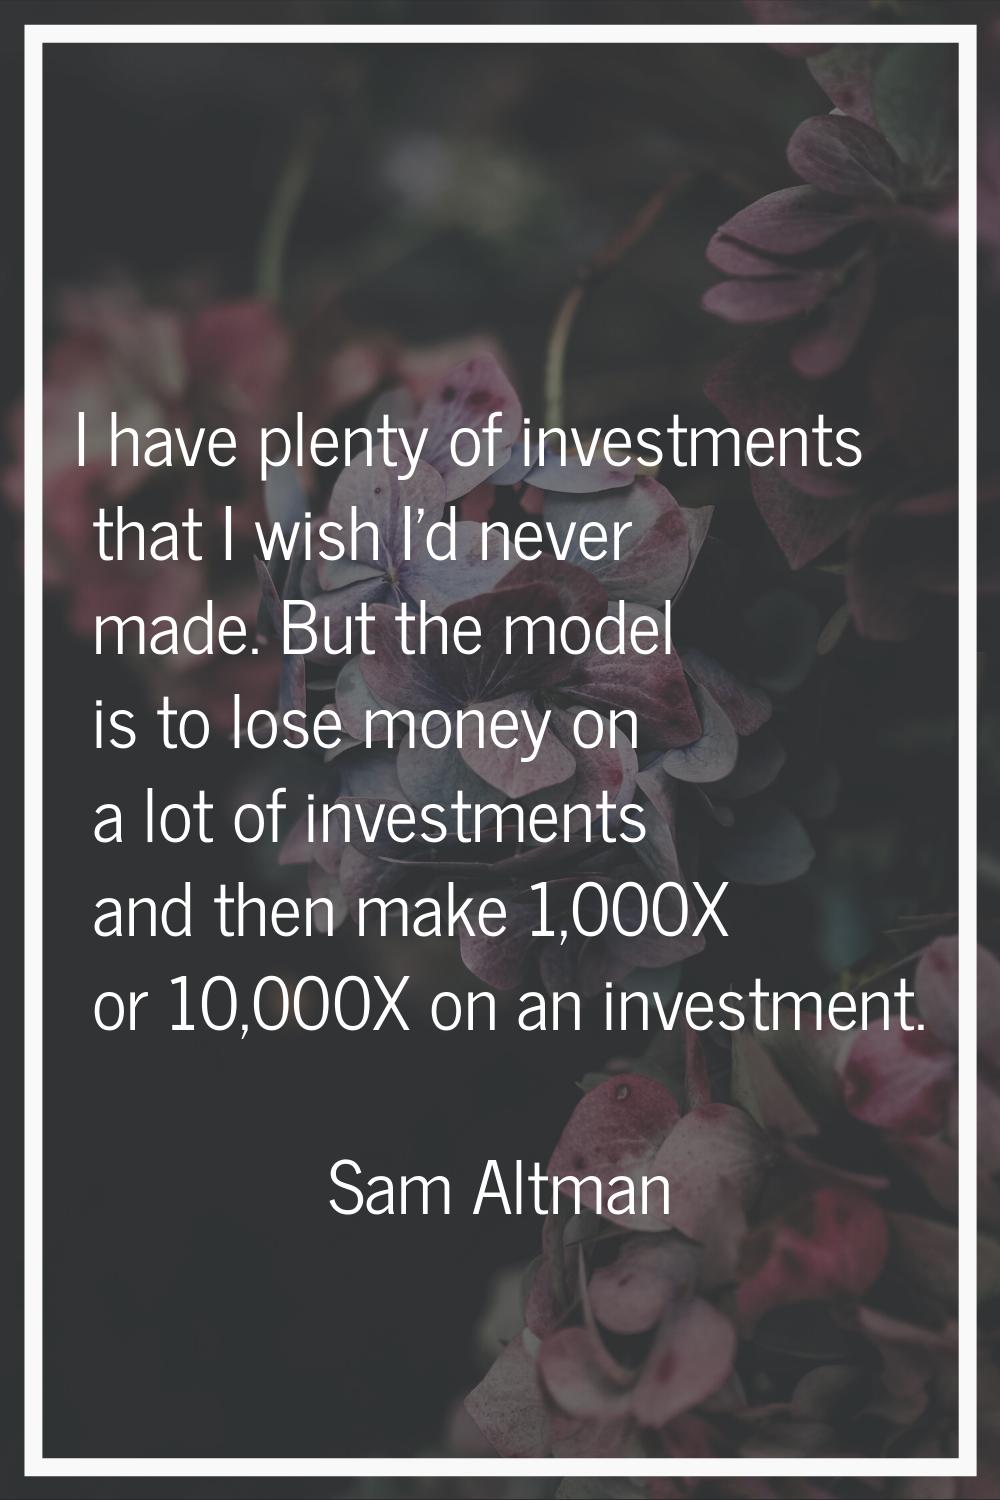 I have plenty of investments that I wish I'd never made. But the model is to lose money on a lot of